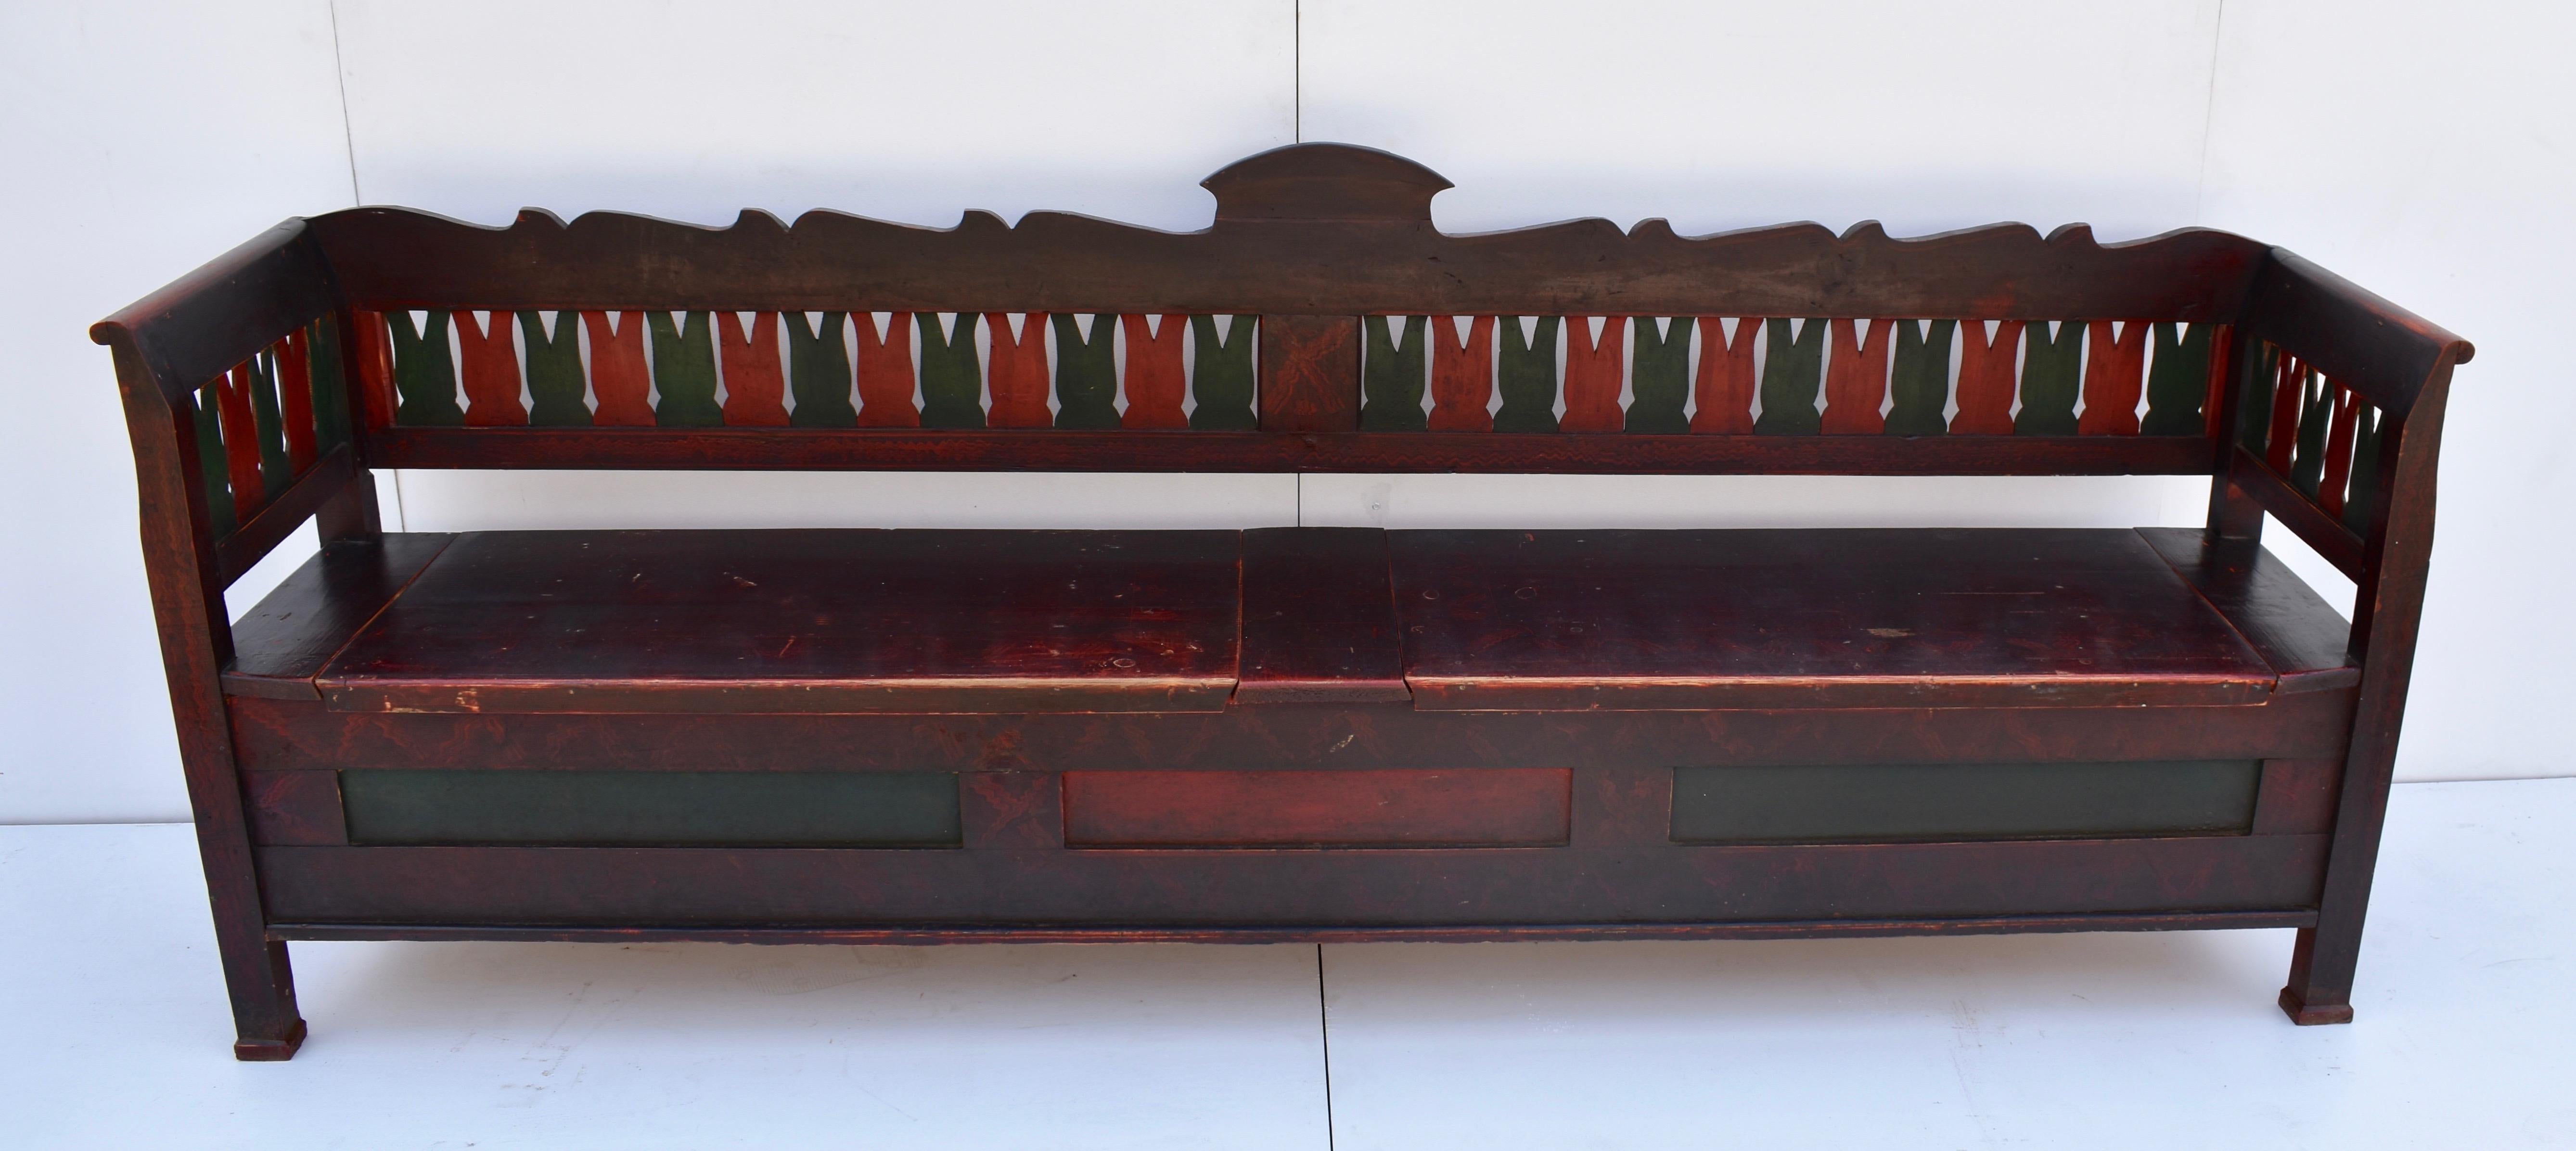 This massive pine storage bench has a nicely scalloped back rail with a crest in the center. The ground is a stylized grain paint in shades of burgundy. Red and green splats alternate around the area between the back and arm rails. The deep storage